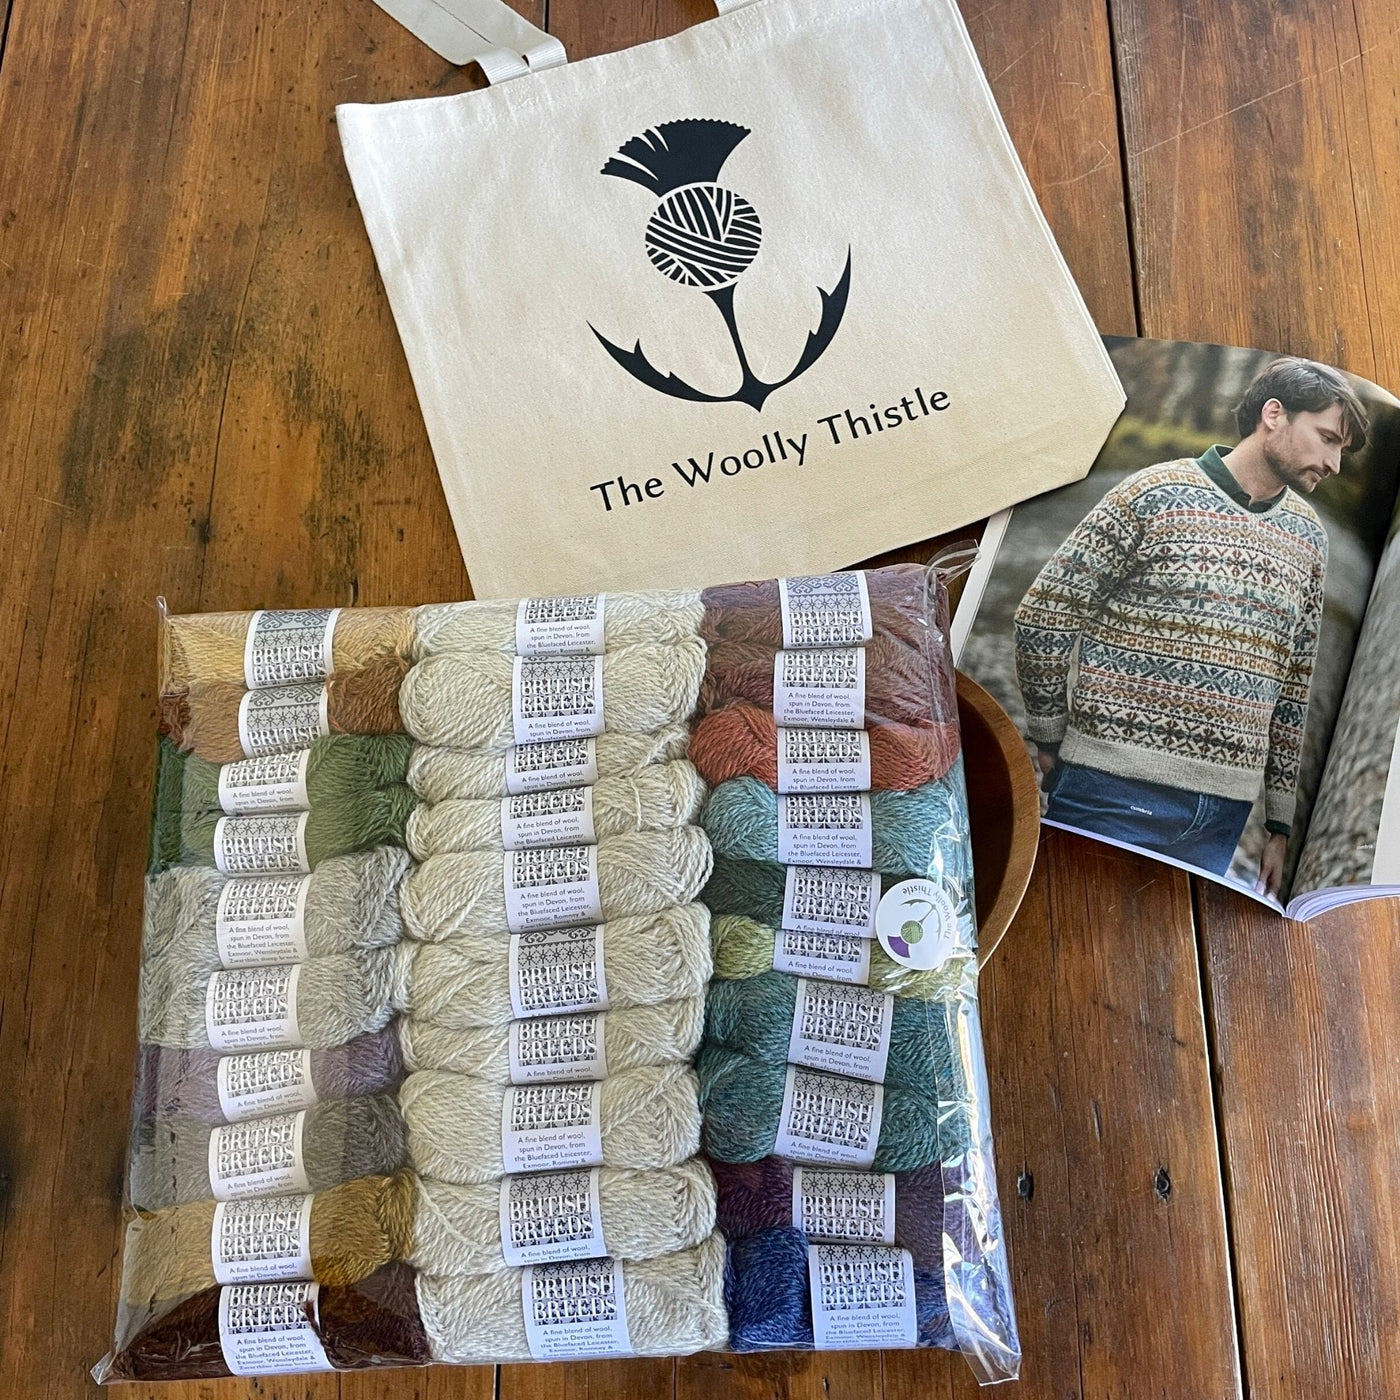 Marie Wallin's Book Cumbria open to page for Troutbeck sweater with components of kit including all yarn needed to knit sweater along with a Woolly Thistle Tote.